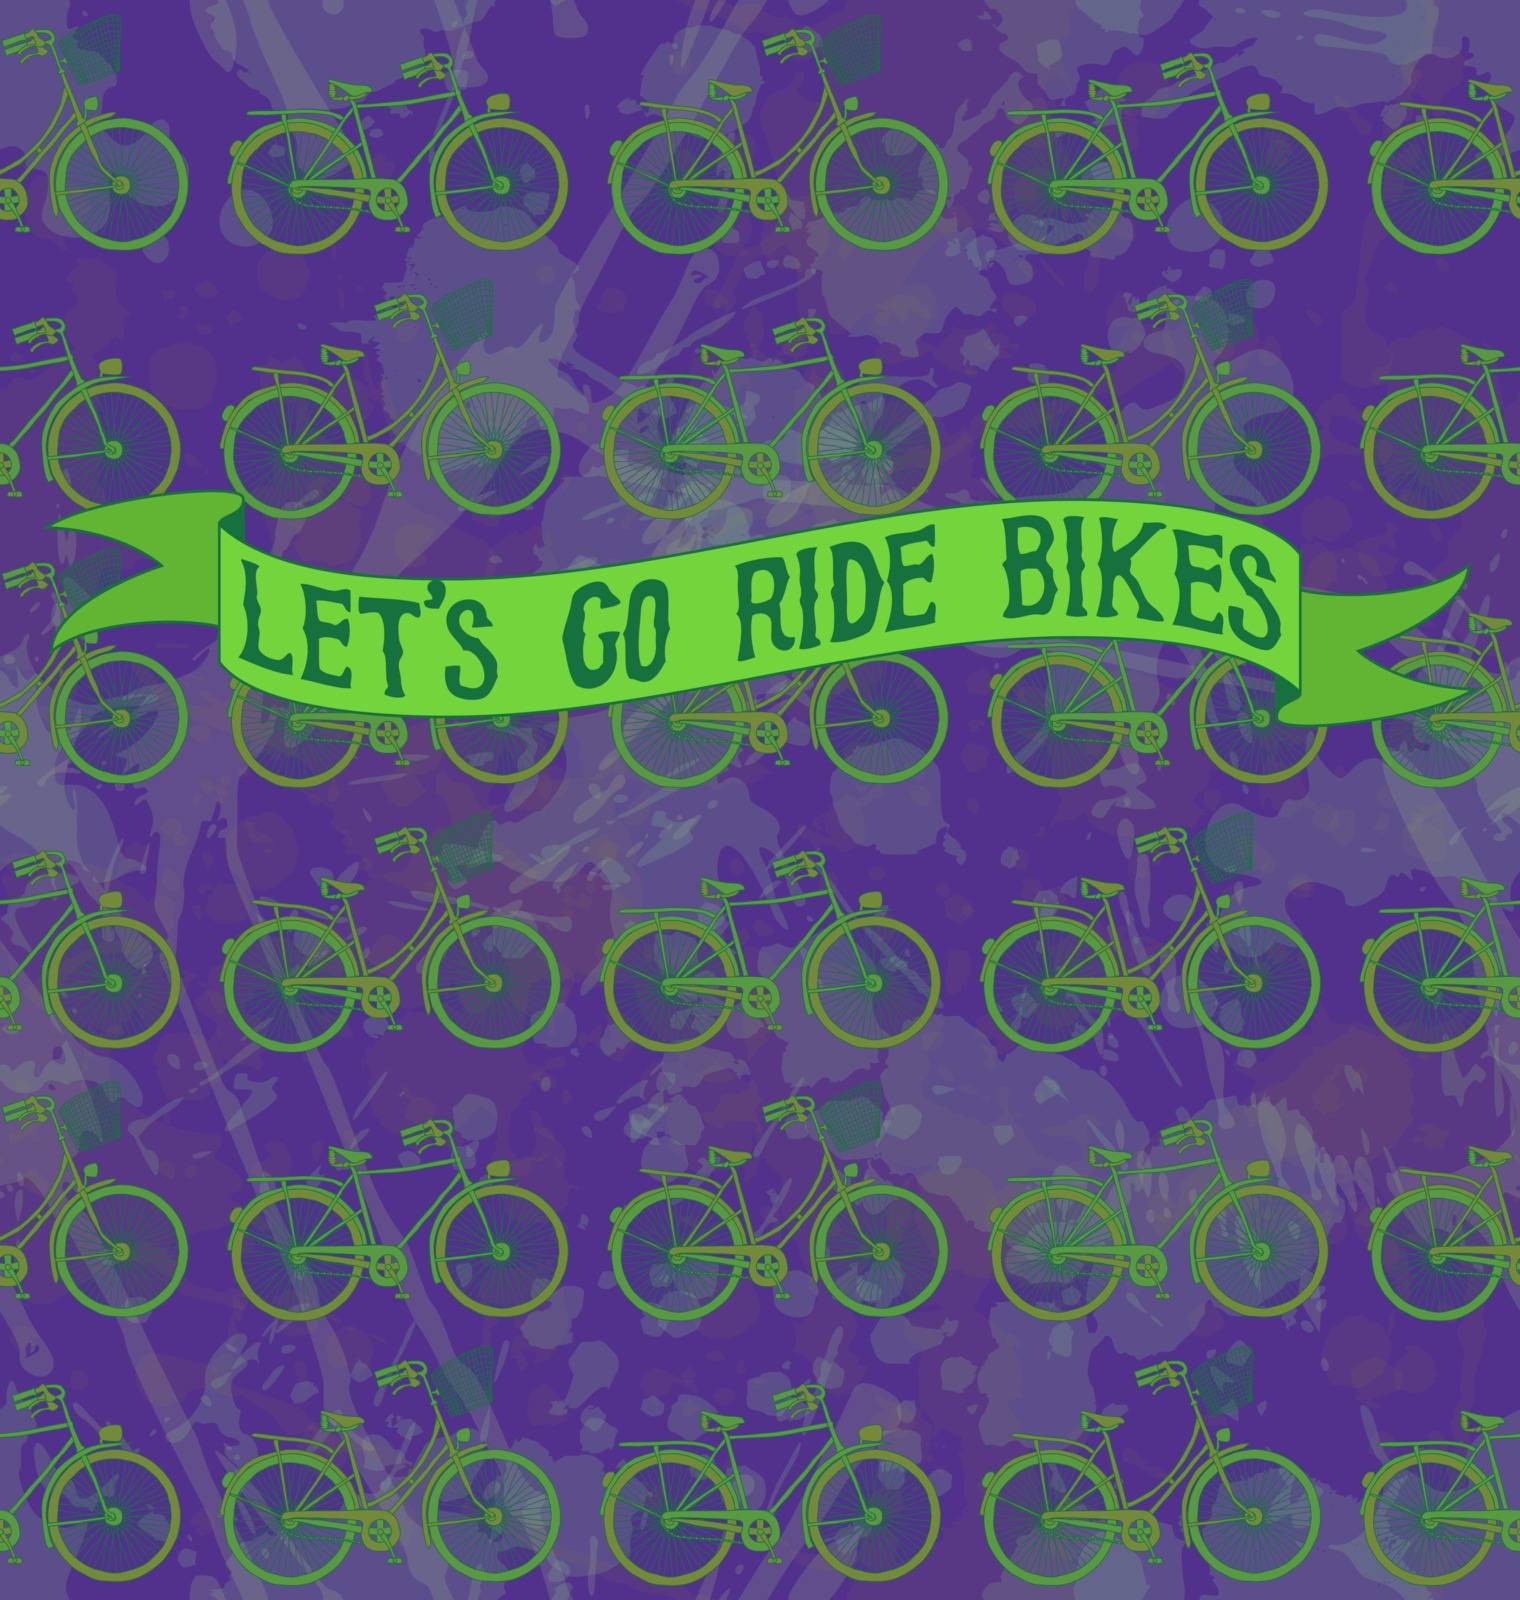 Bicycle seamless pattern with "Let's go ride bikes" banner.